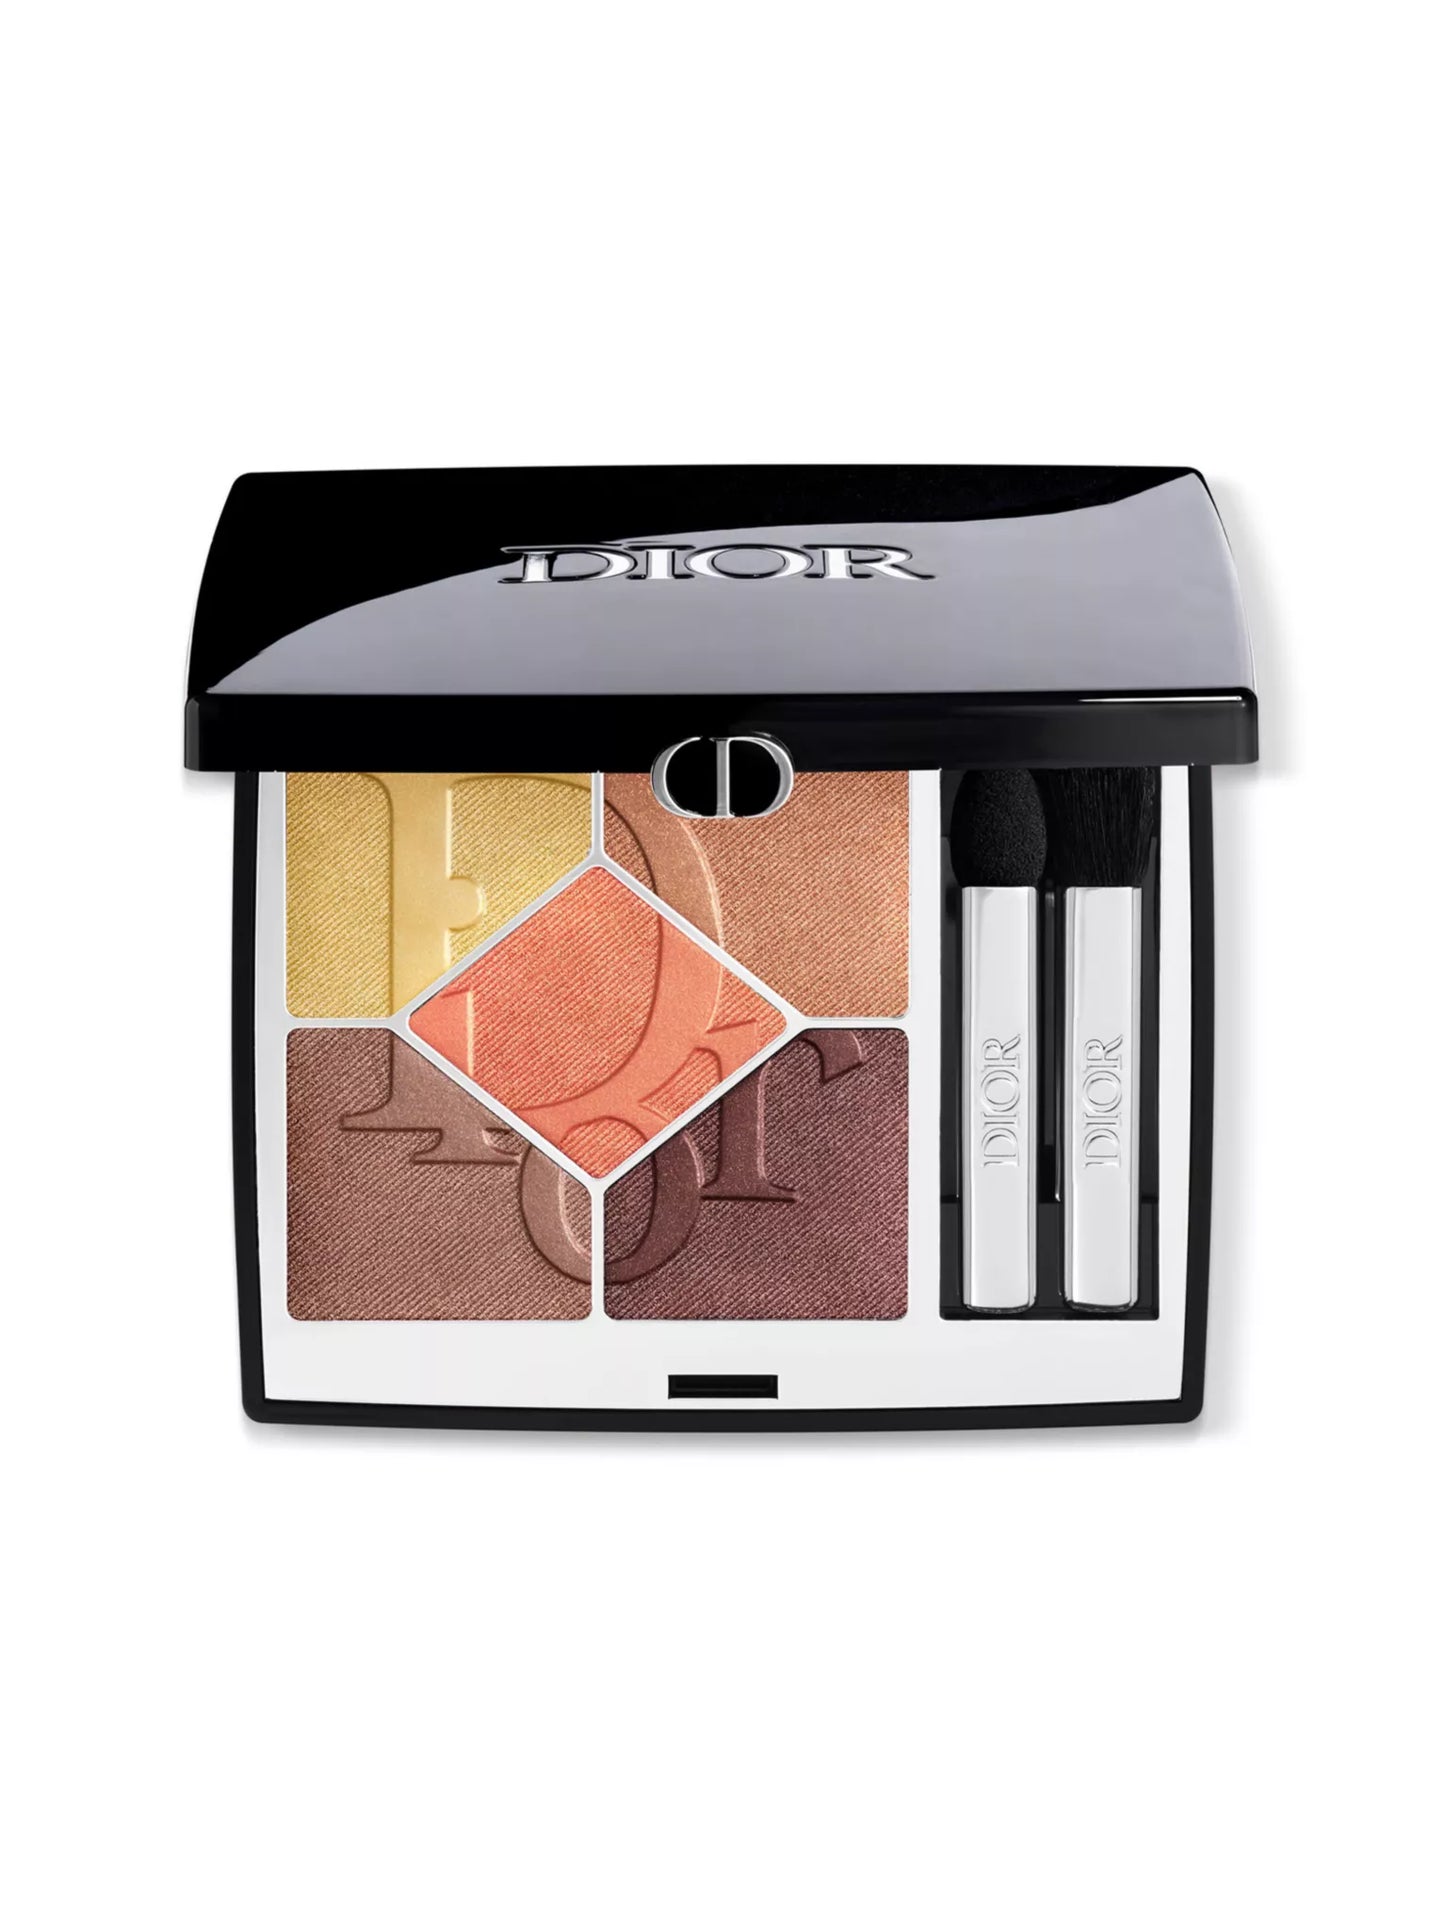 DIOR Diorshow 5 Couleurs limited-edition eyeshadow palette 4g